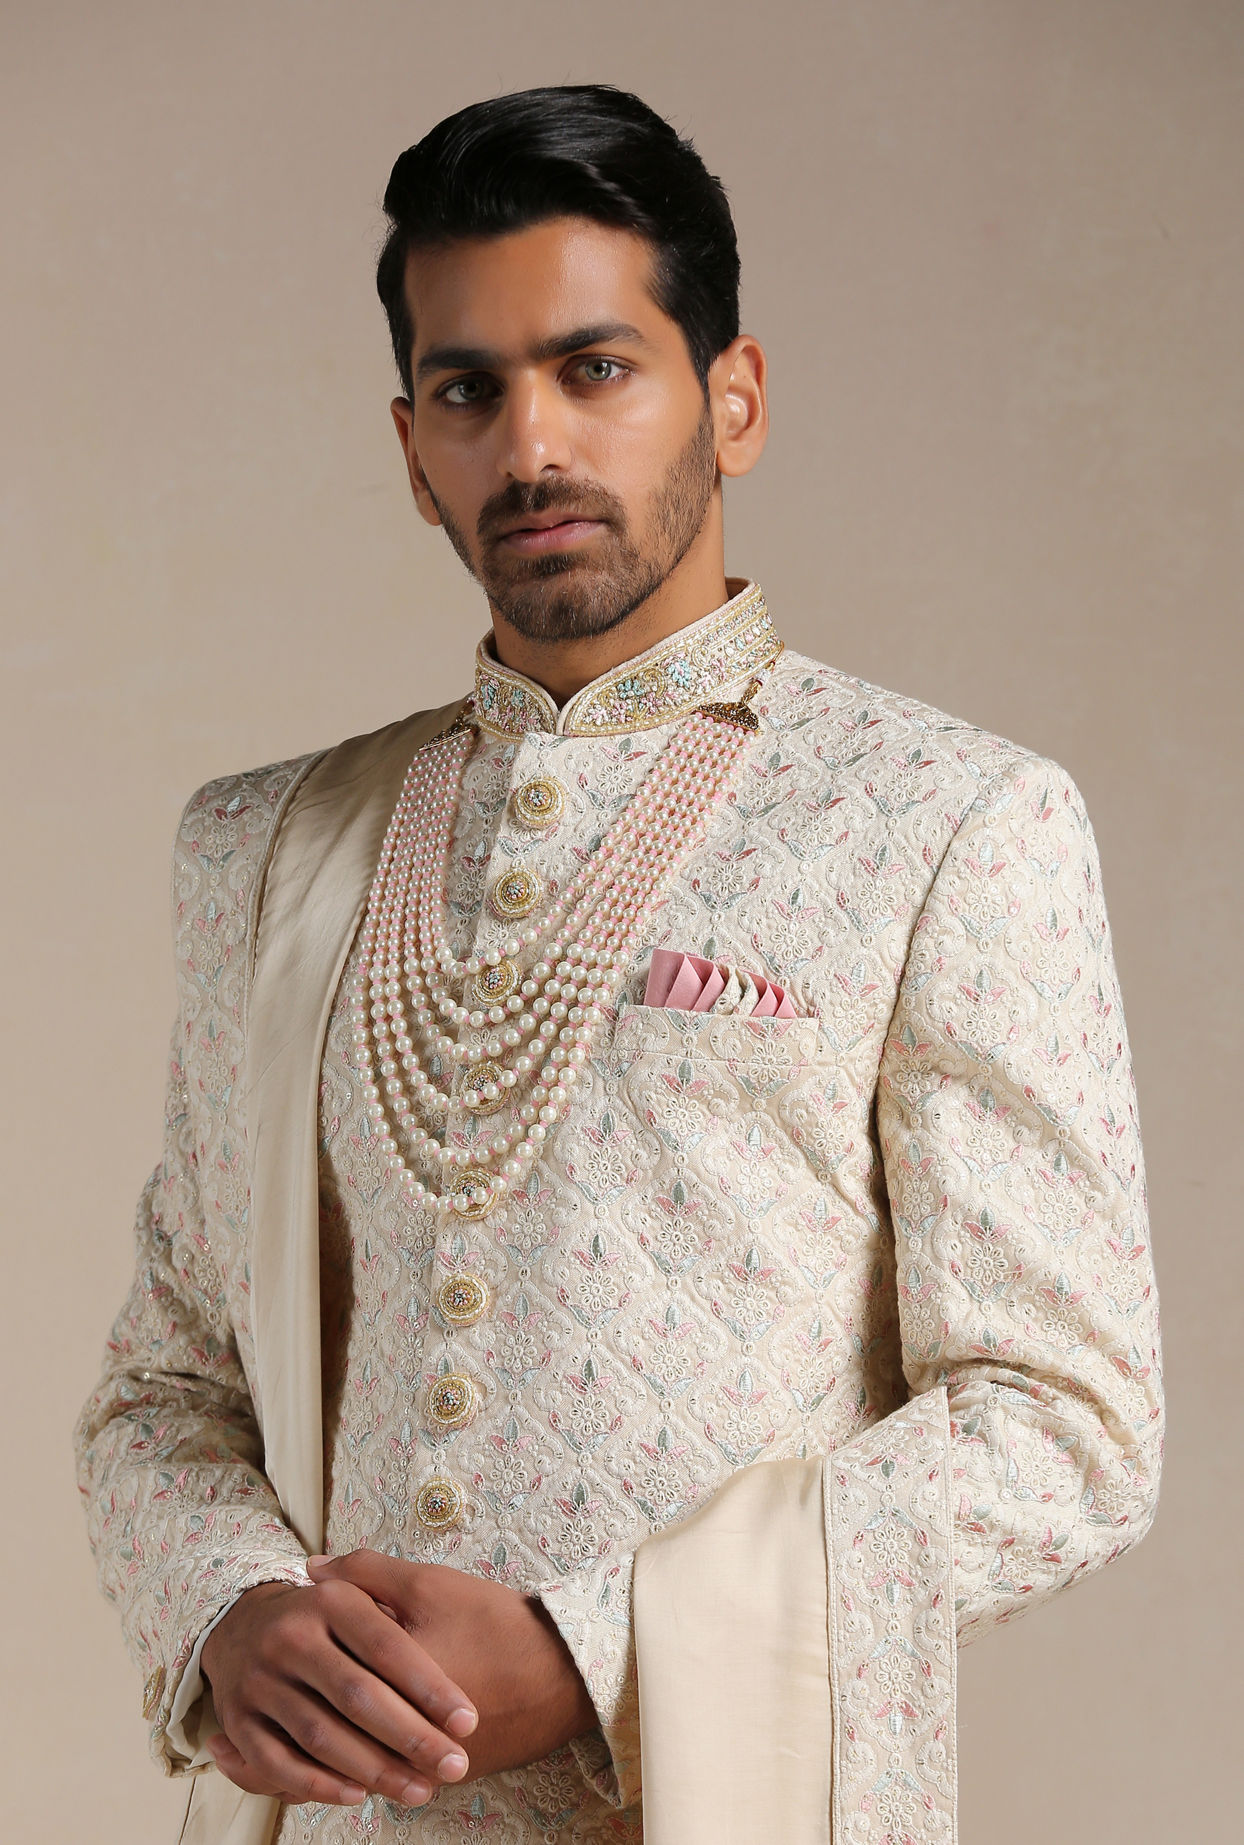 Buy Pearled Ivory Floral Patterned Sherwani Set Online in India ...